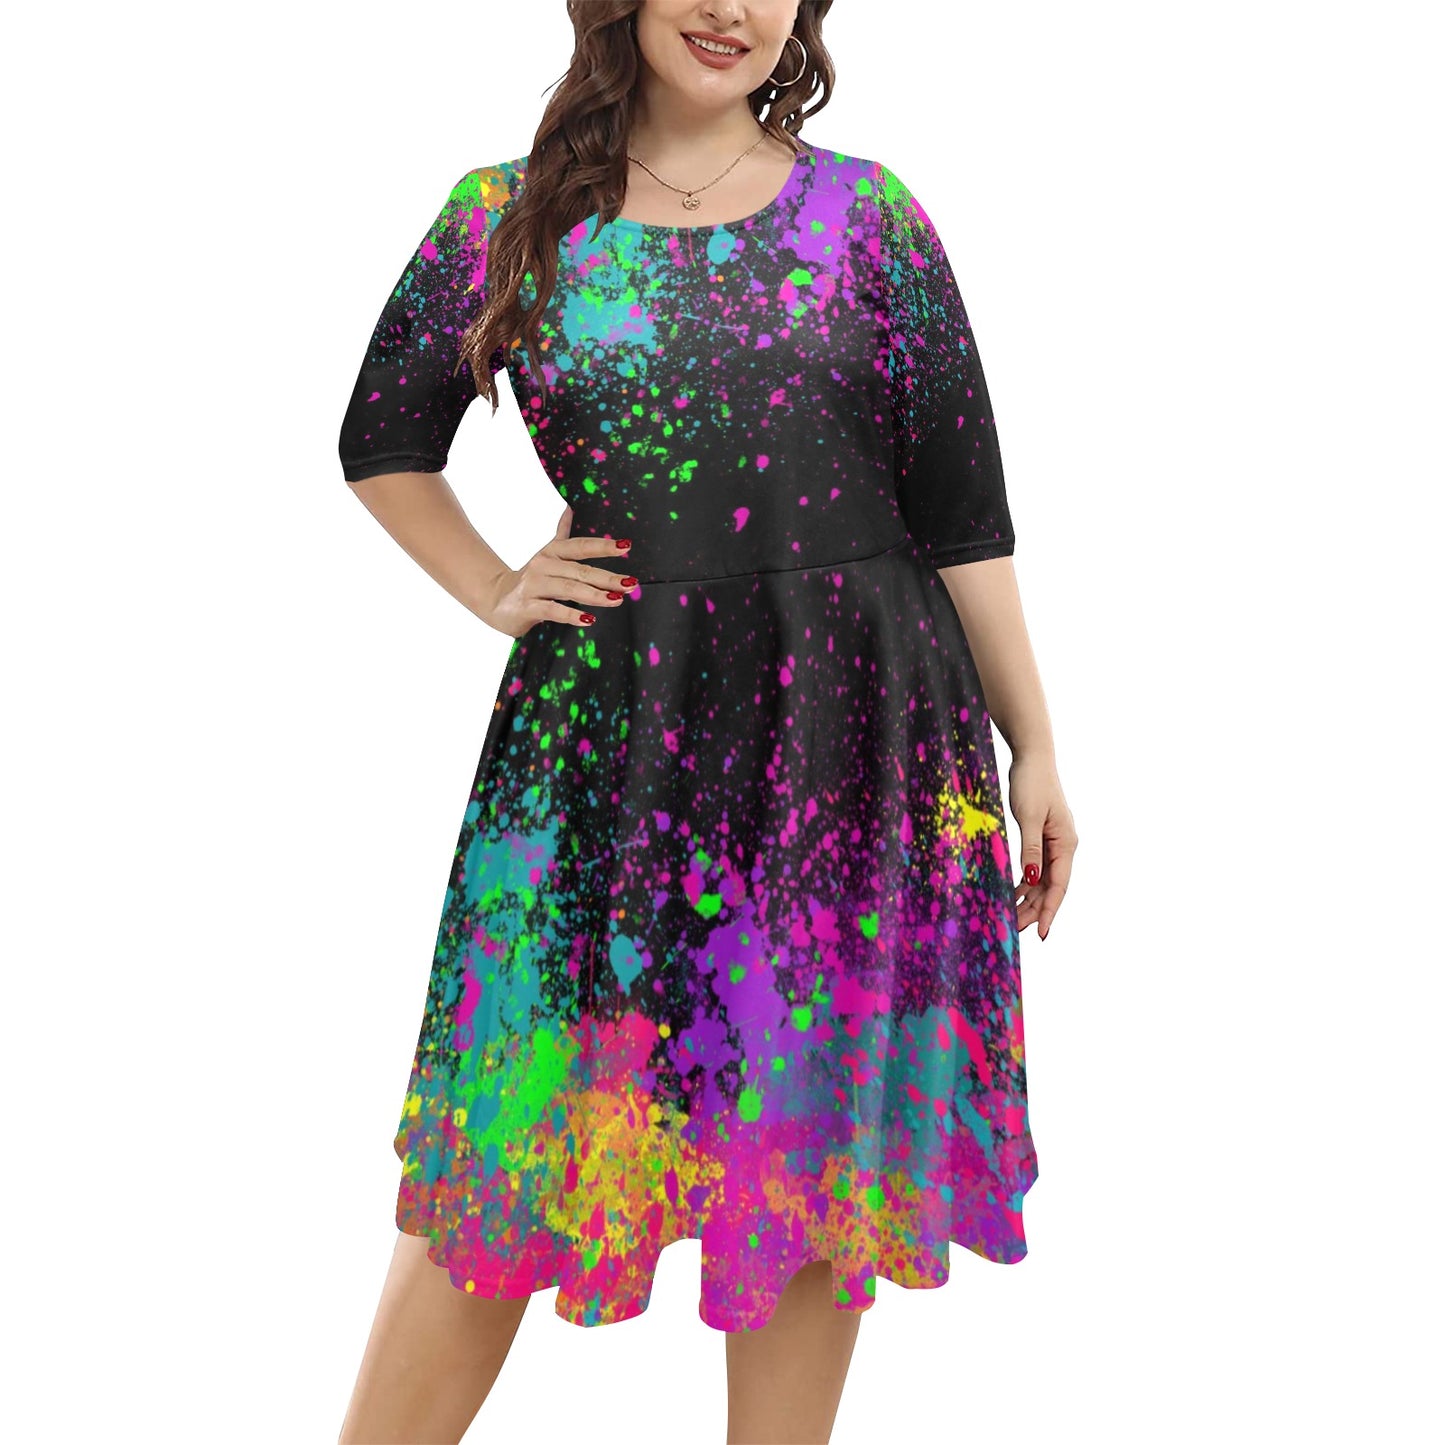 Paint Splatter full circle dress with sleeves